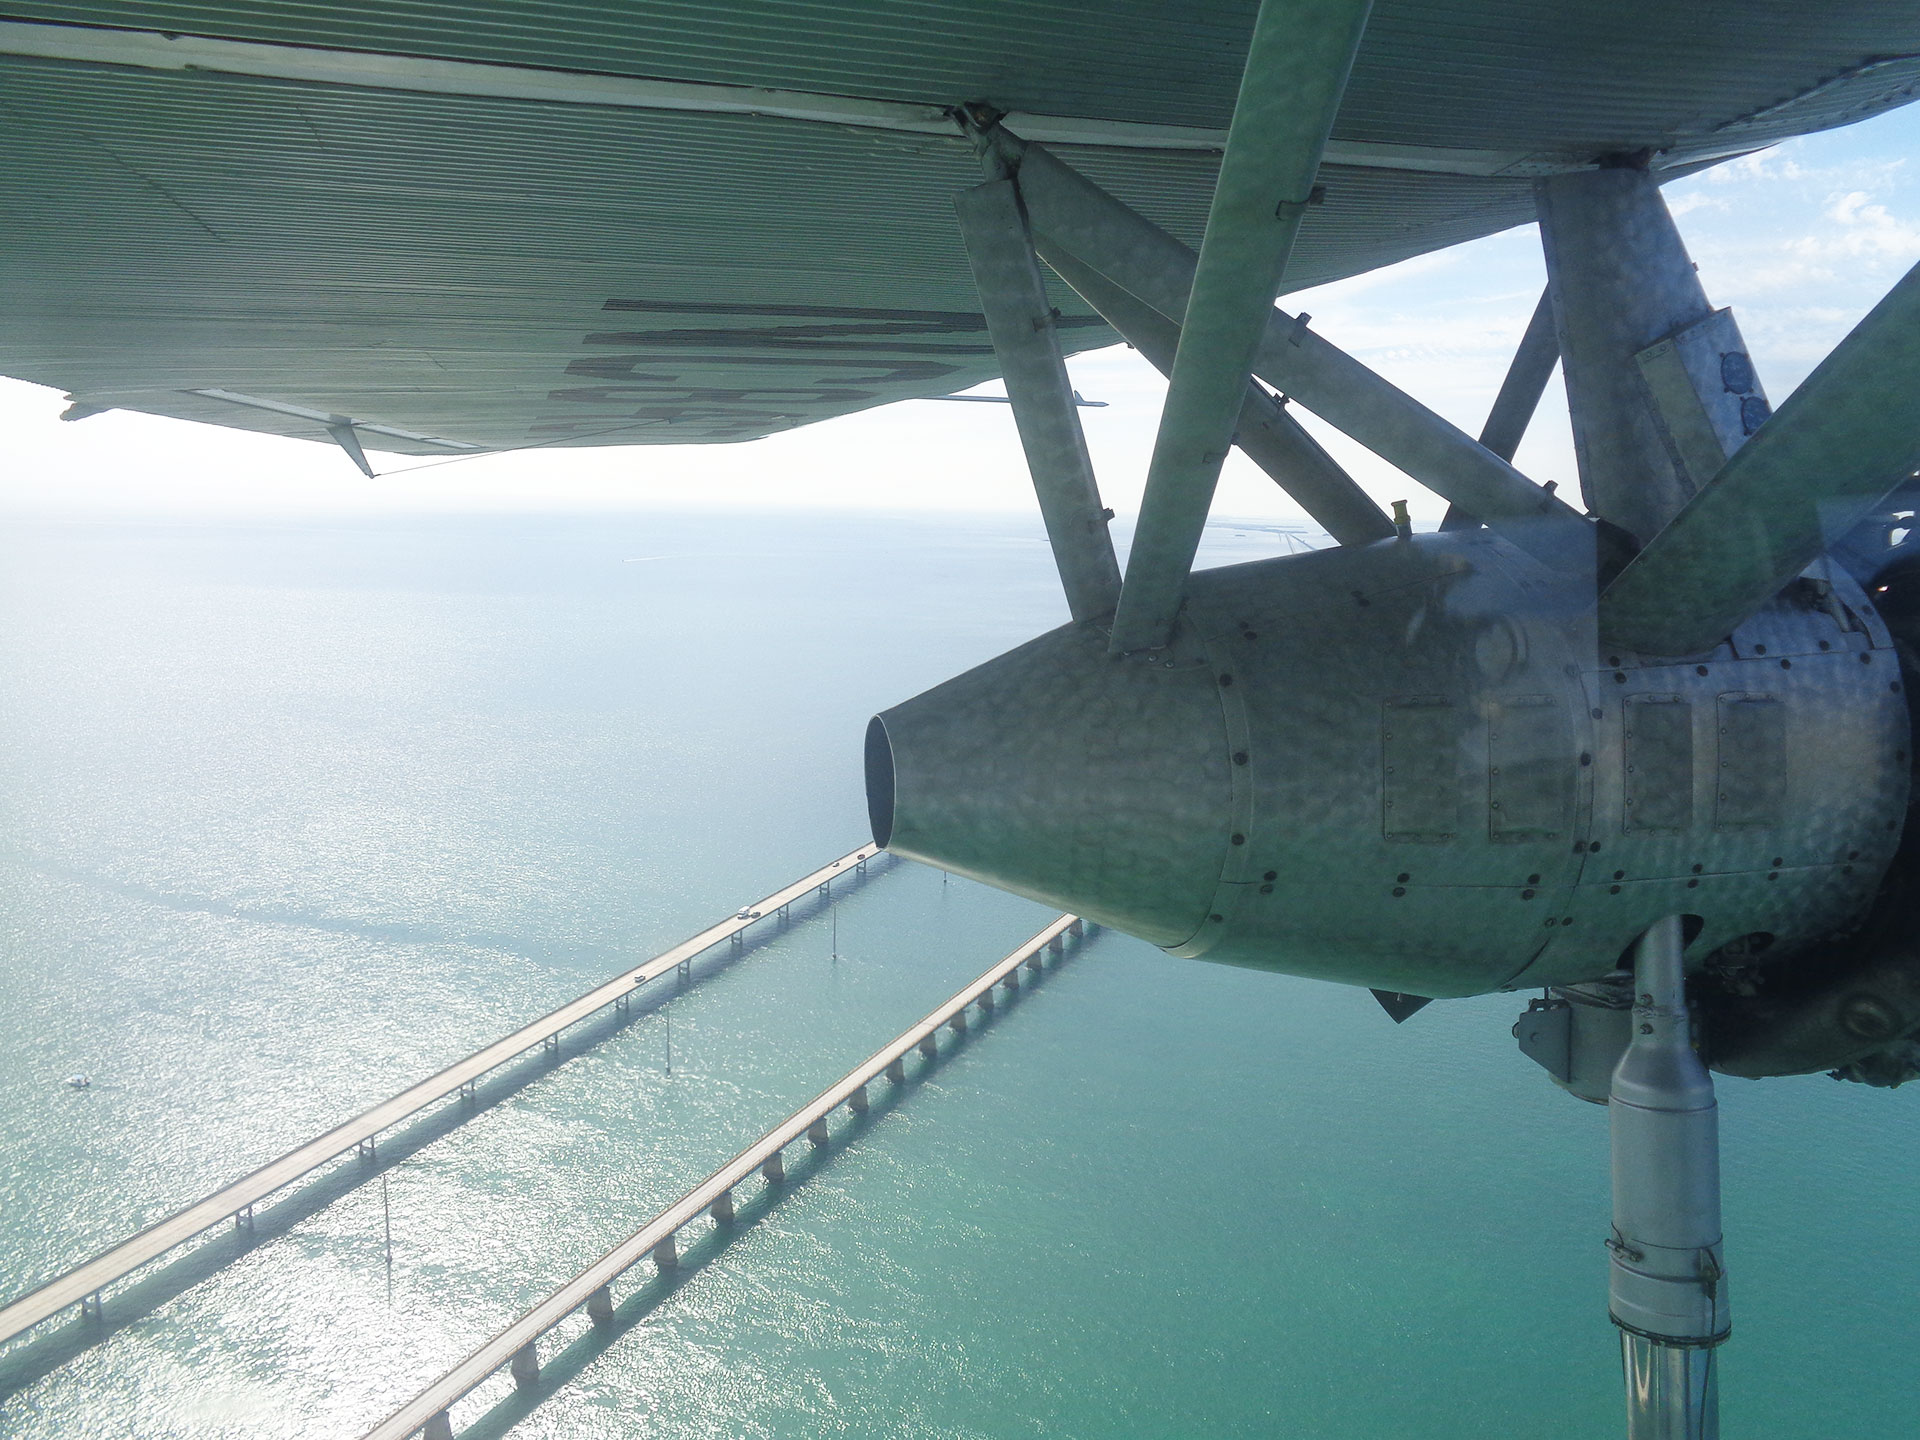 (View from Ford Tri-Motor) A view of the famed “Seven Mile Bridge” in the Florida Keys from the passenger compartment of the Ford Tri-Motor aircraft that Coates flew in Cuba.